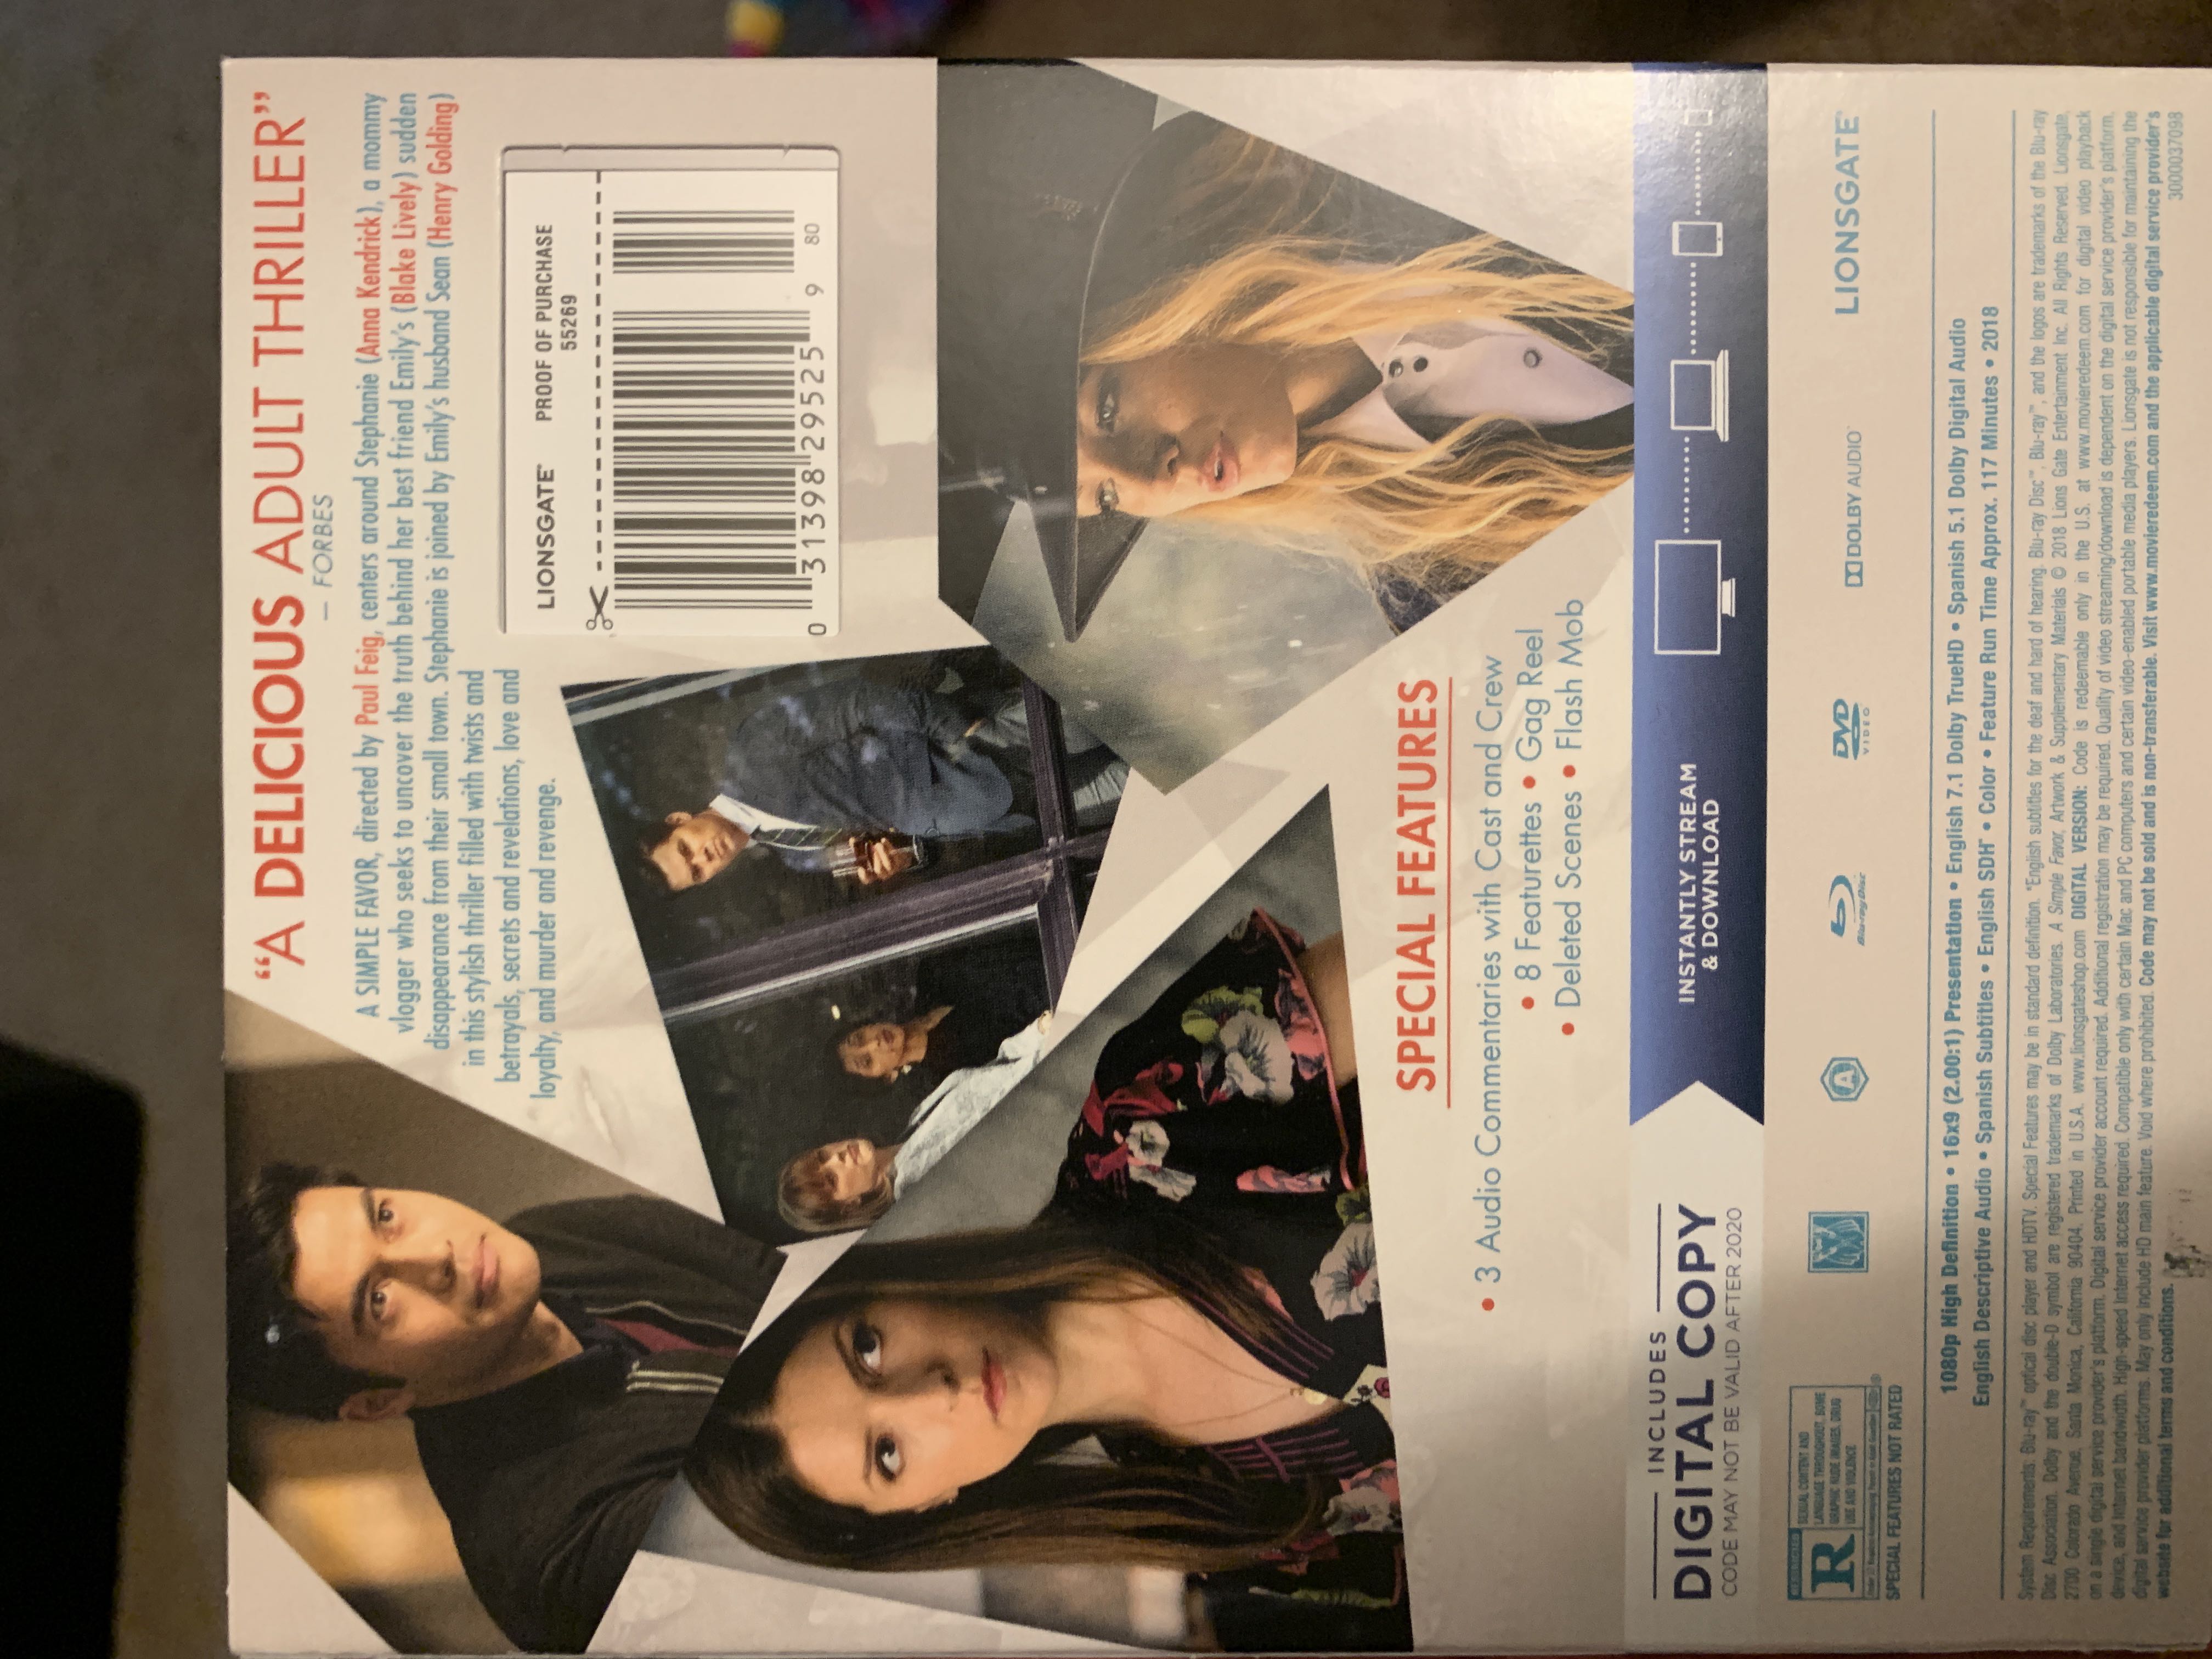 A Simple Favor Blu-ray movie collectible [Barcode 031398295259] - Main Image 2